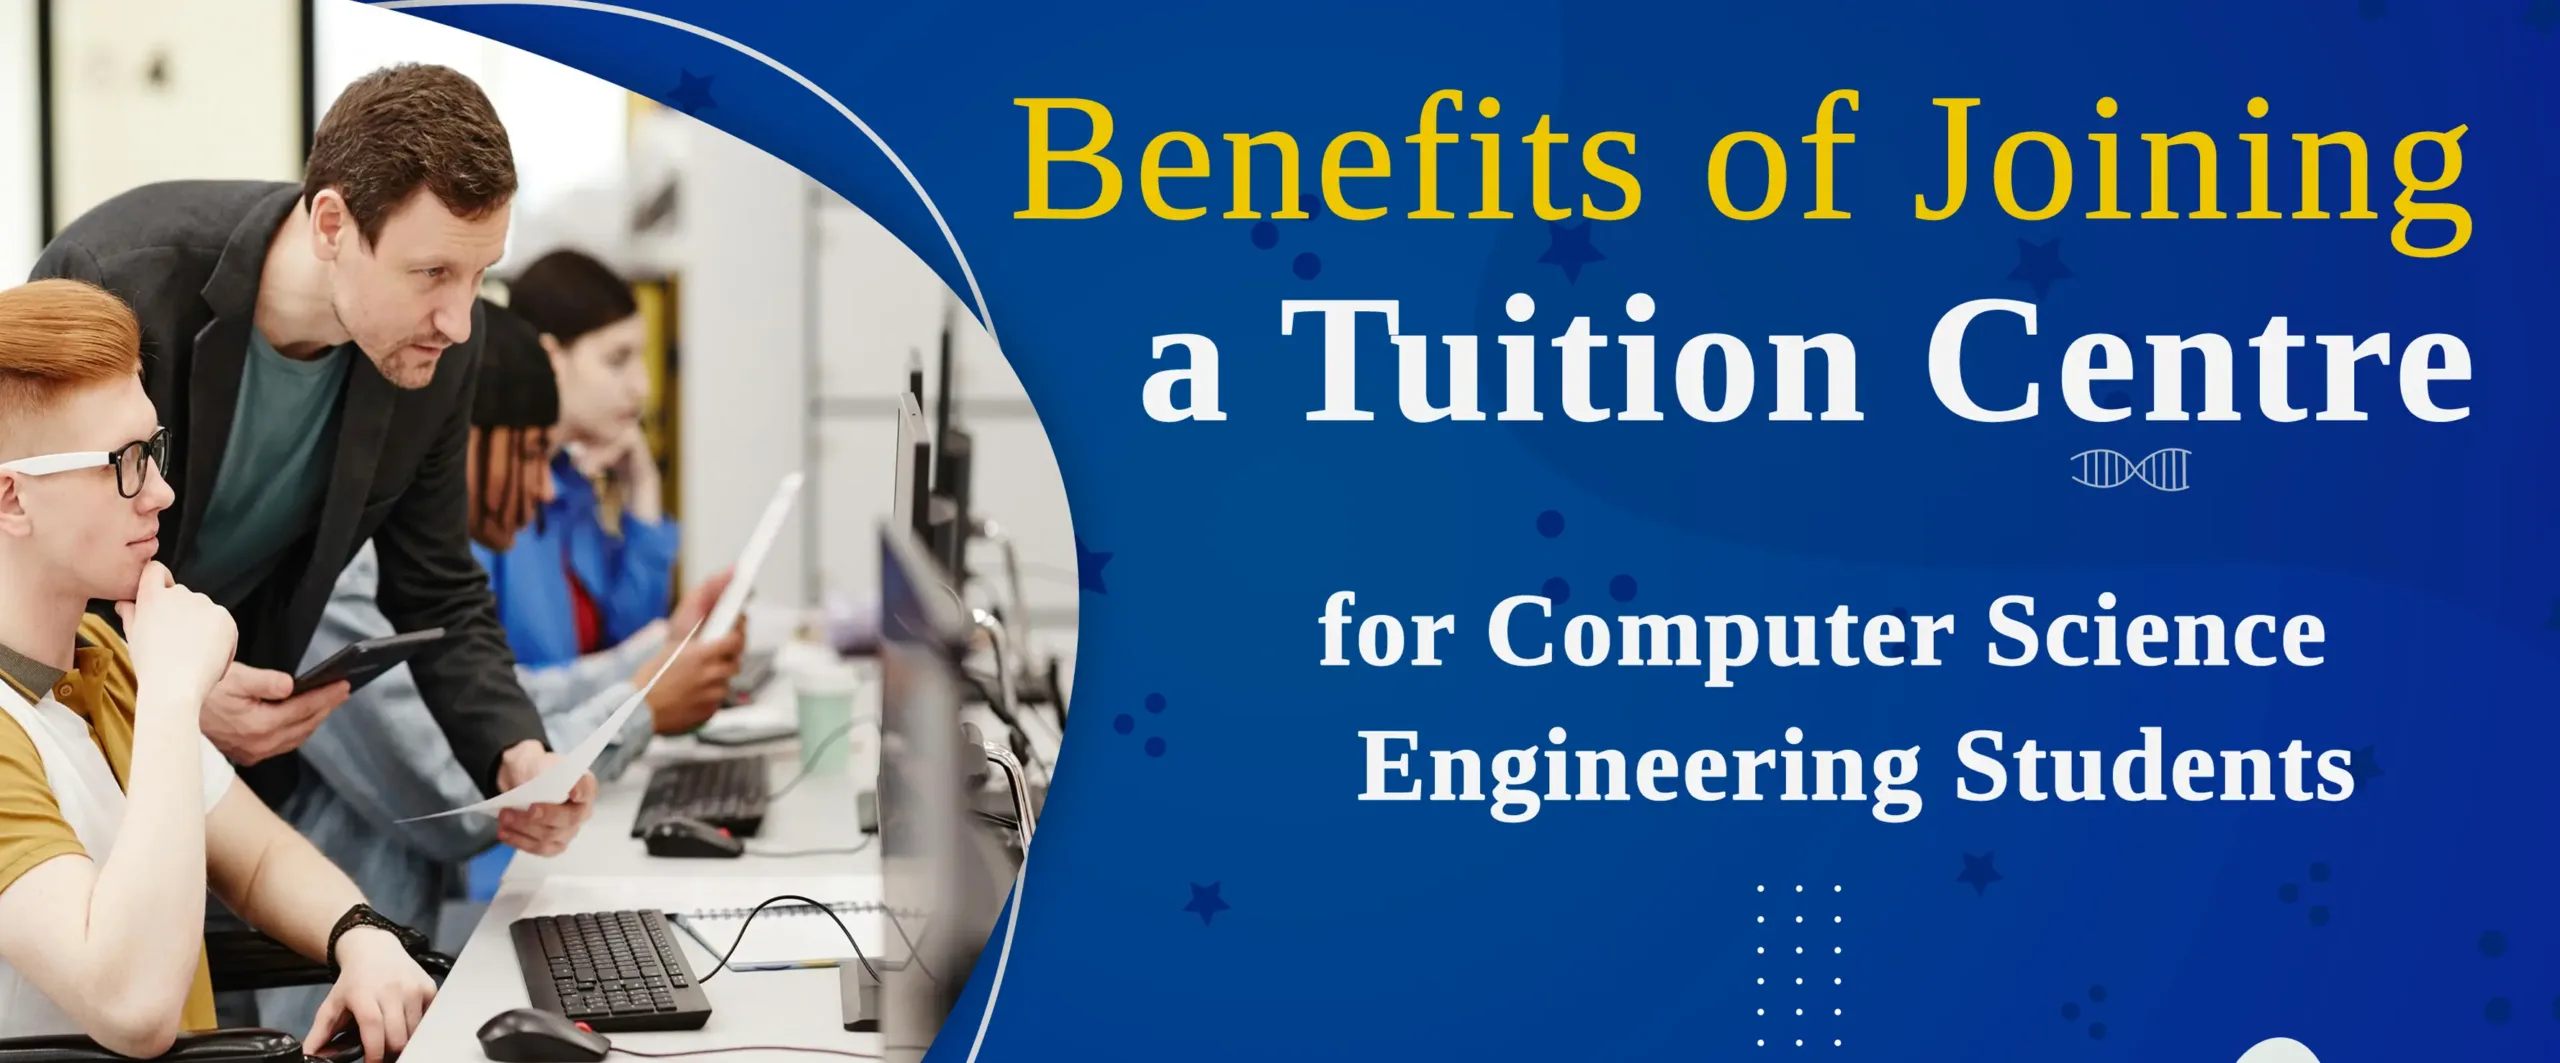 The Benefits of Joining a Tuition Centre for Computer Science Engineering Students